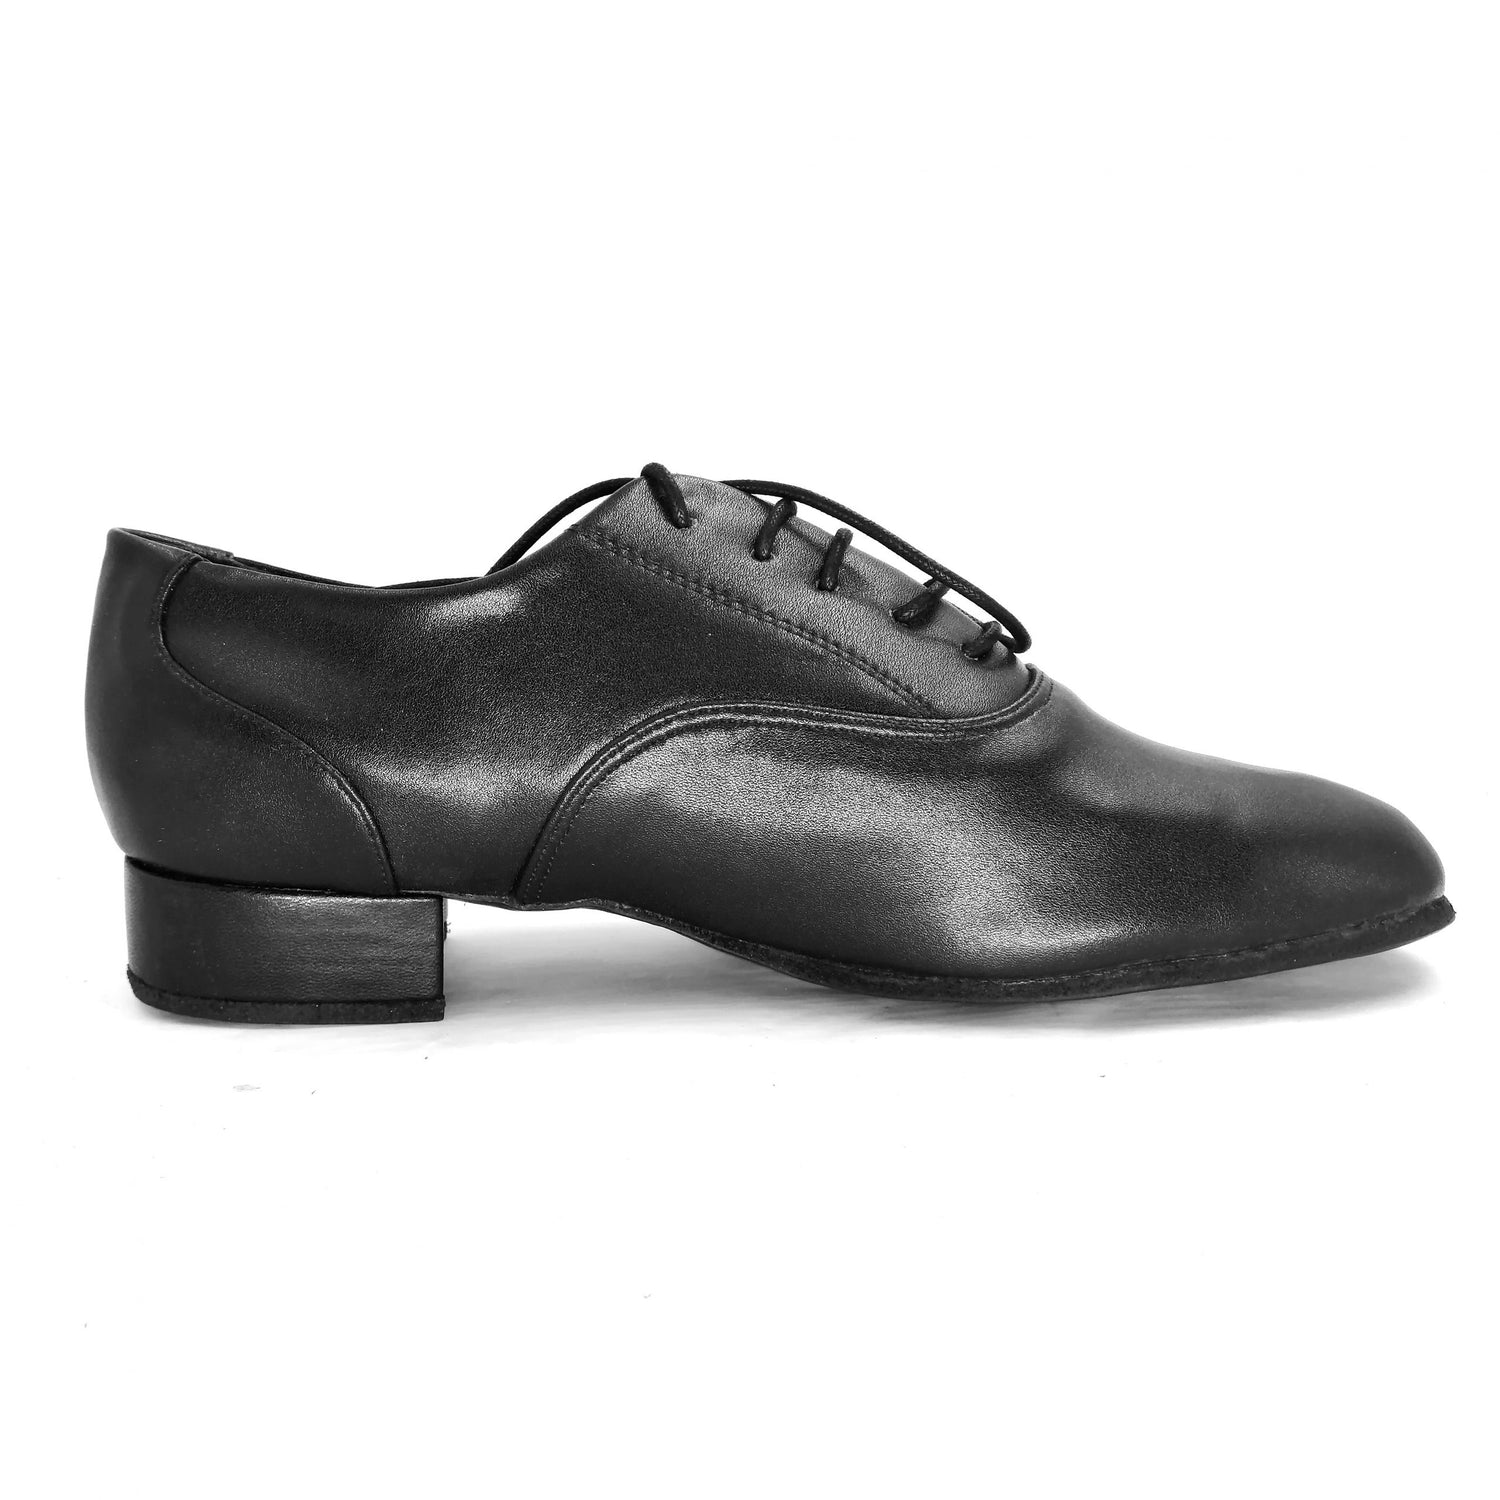 Pro Dancer Men's Tango Shoes with 1 inch Heel Leather Lace-up in Black5